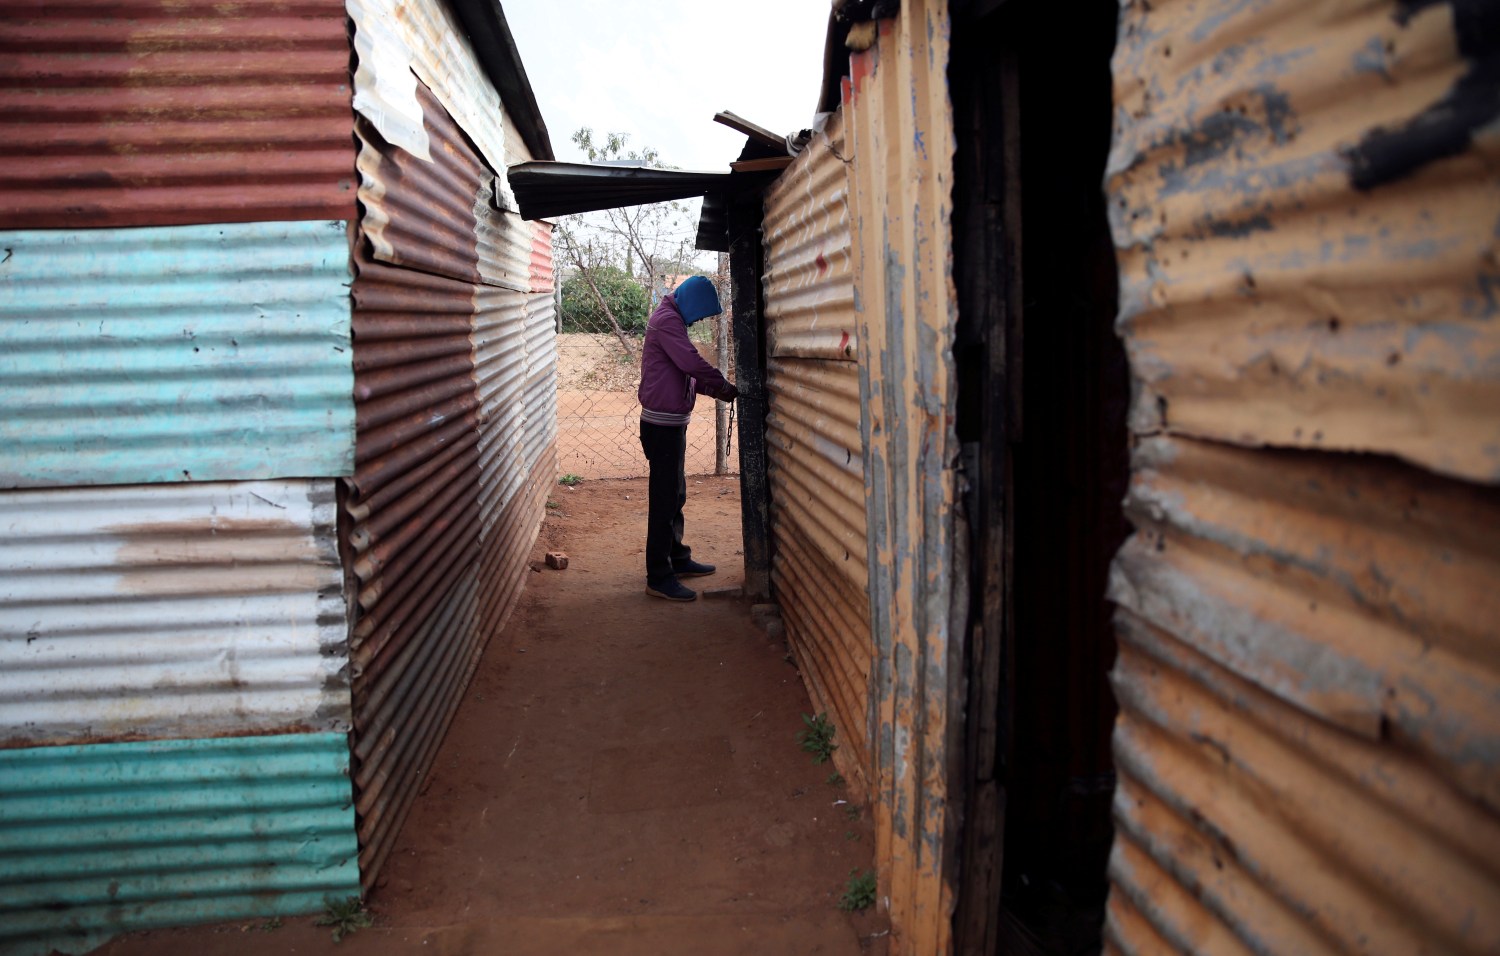 A men locks his shack at Slovo Park, an informal settlement located next to the Nancefield industrial area, south of Johannesburg, South Africa May 29, 2018. Picture taken May 29, 2018. REUTERS/Siphiwe Sibeko - RC1BE7B6FC00